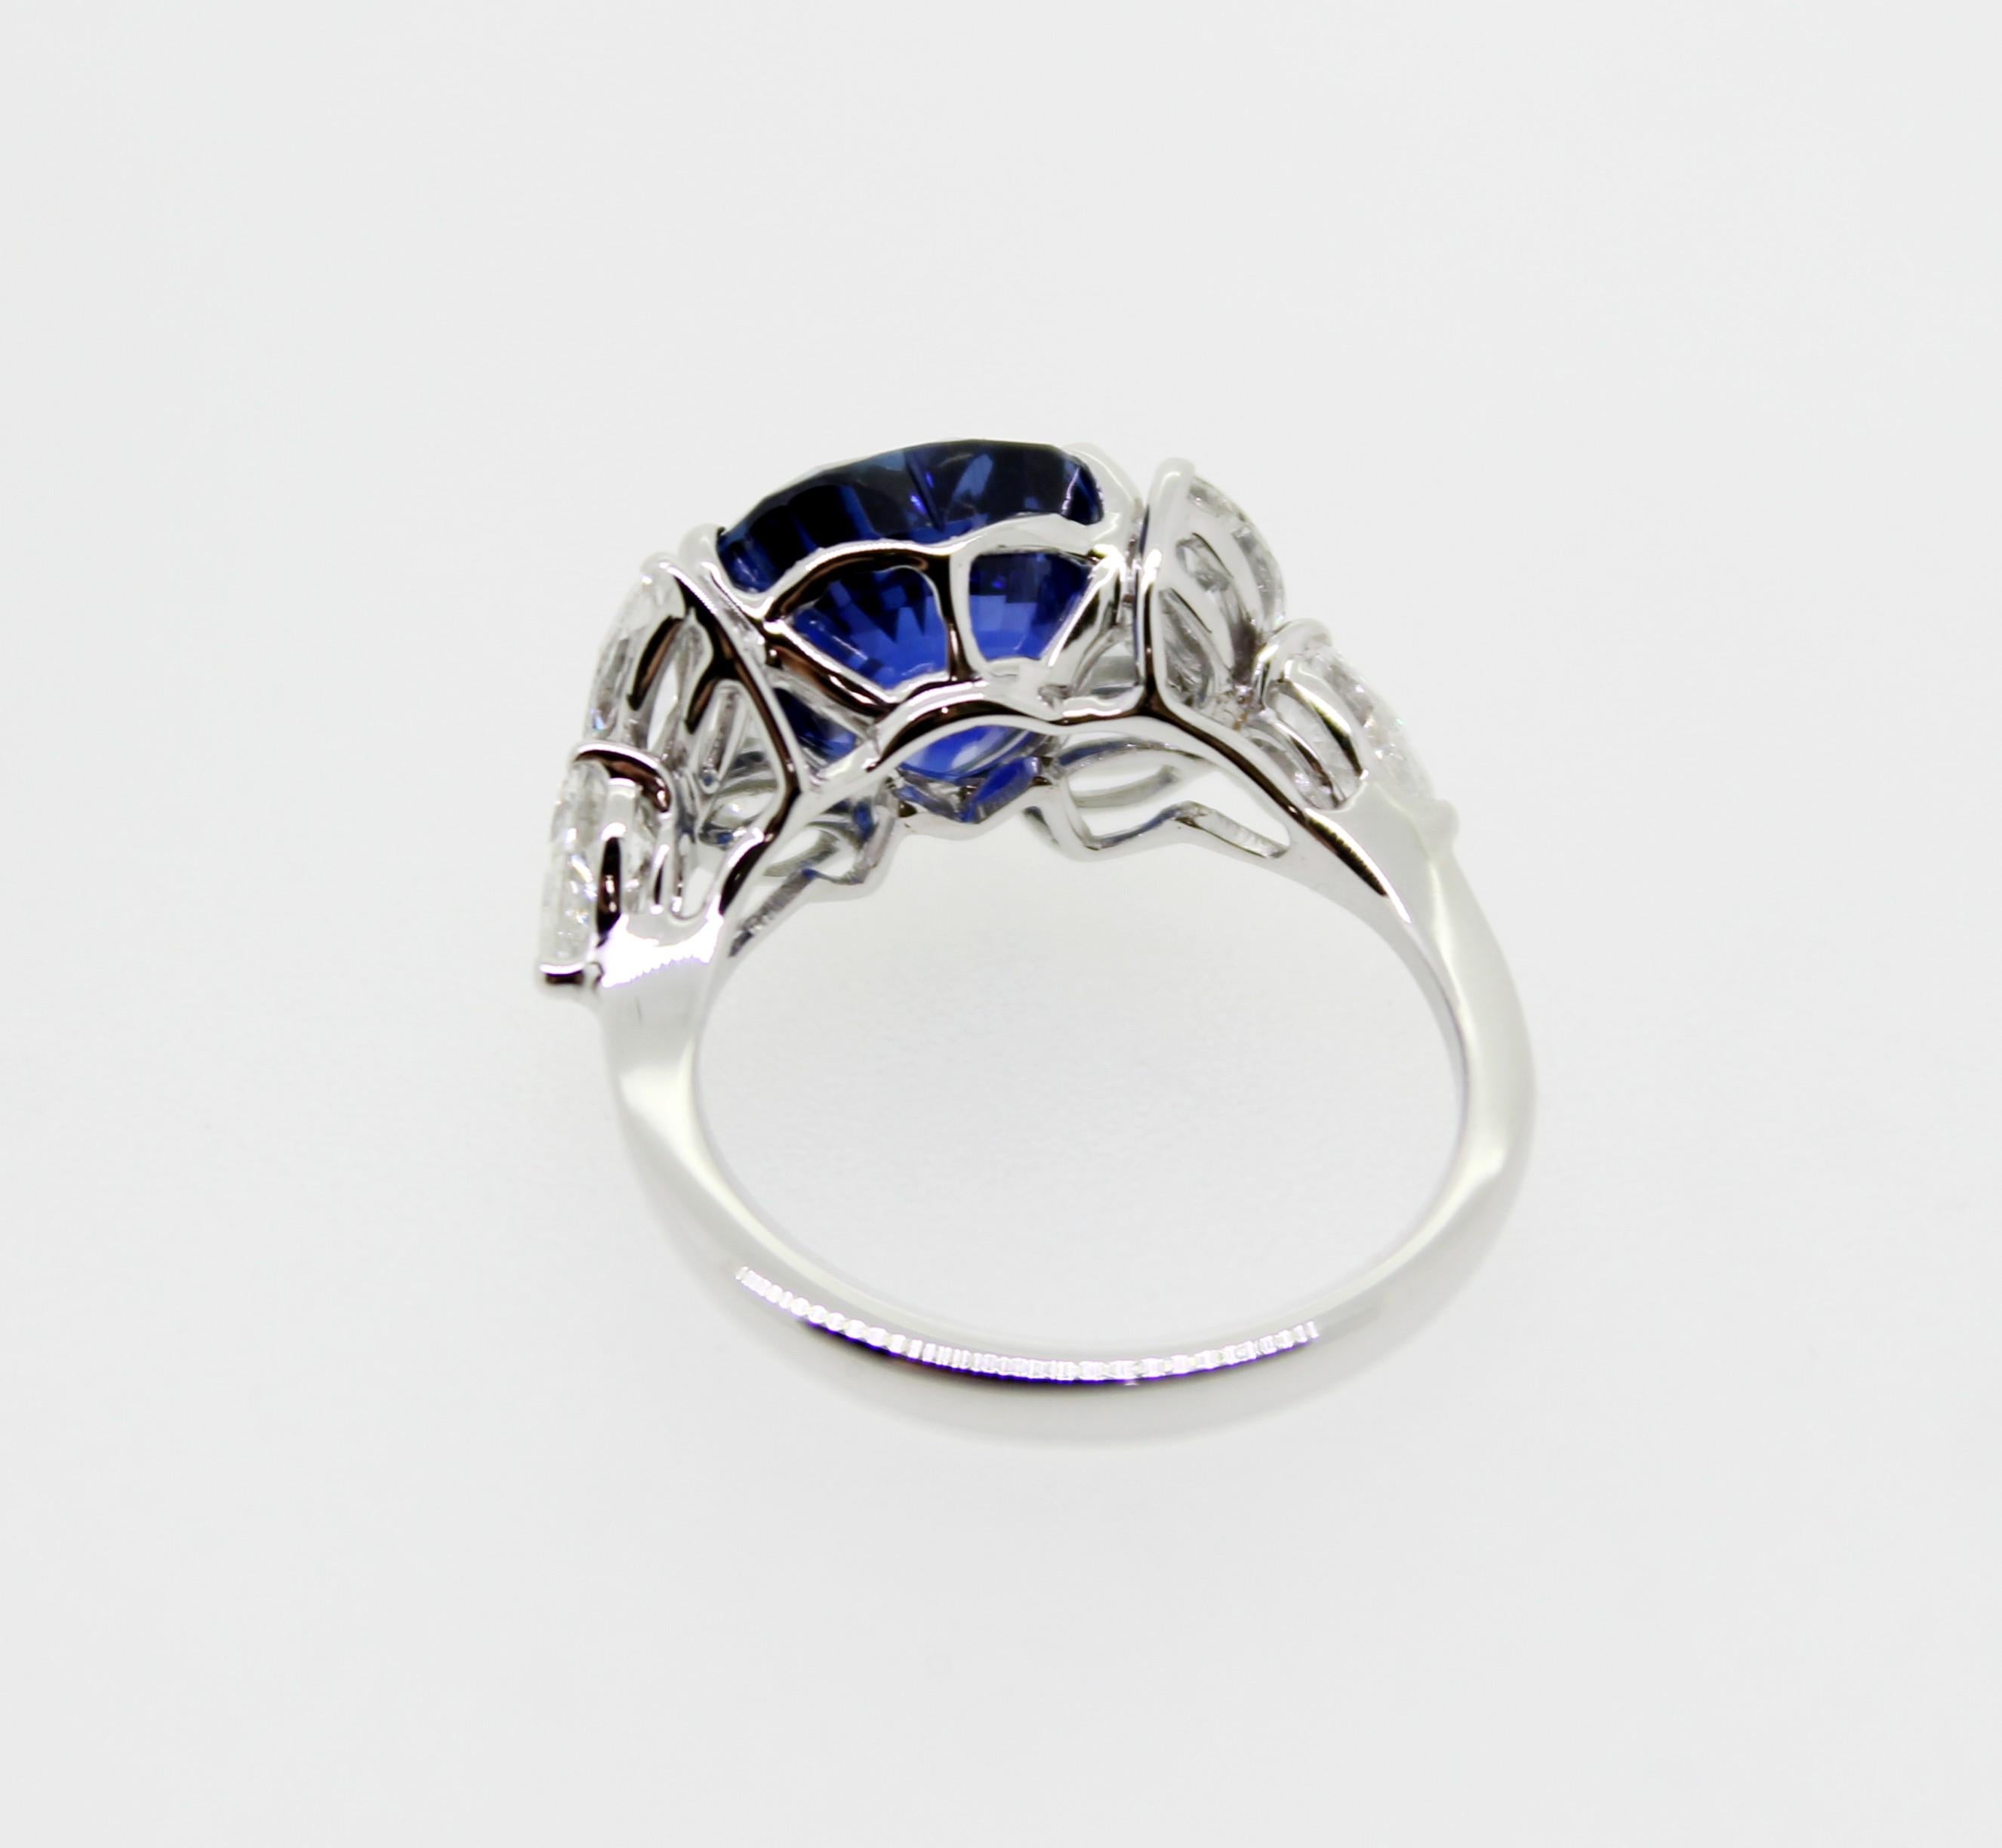 Women's 5.95 Carat Heart Shape Sapphire and White Marquise Diamond Cocktail Ring For Sale